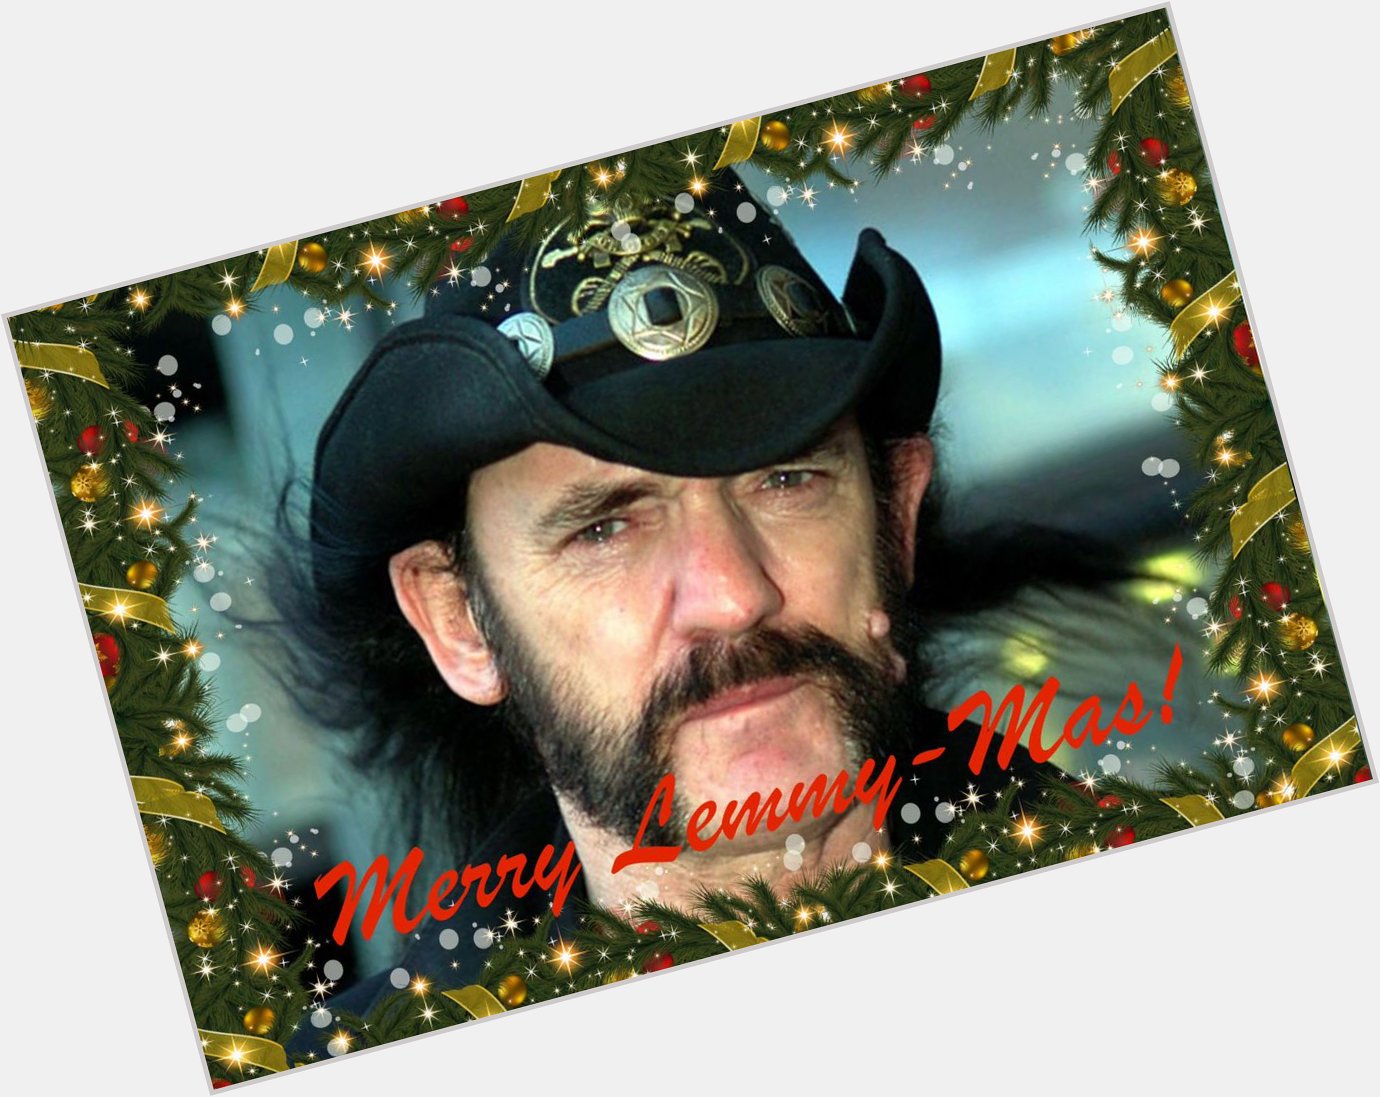 Happy 70th birthday to Lemmy Kilmister! Celebrate Lemmy-mas with a bottle of Jack & hot wings! 